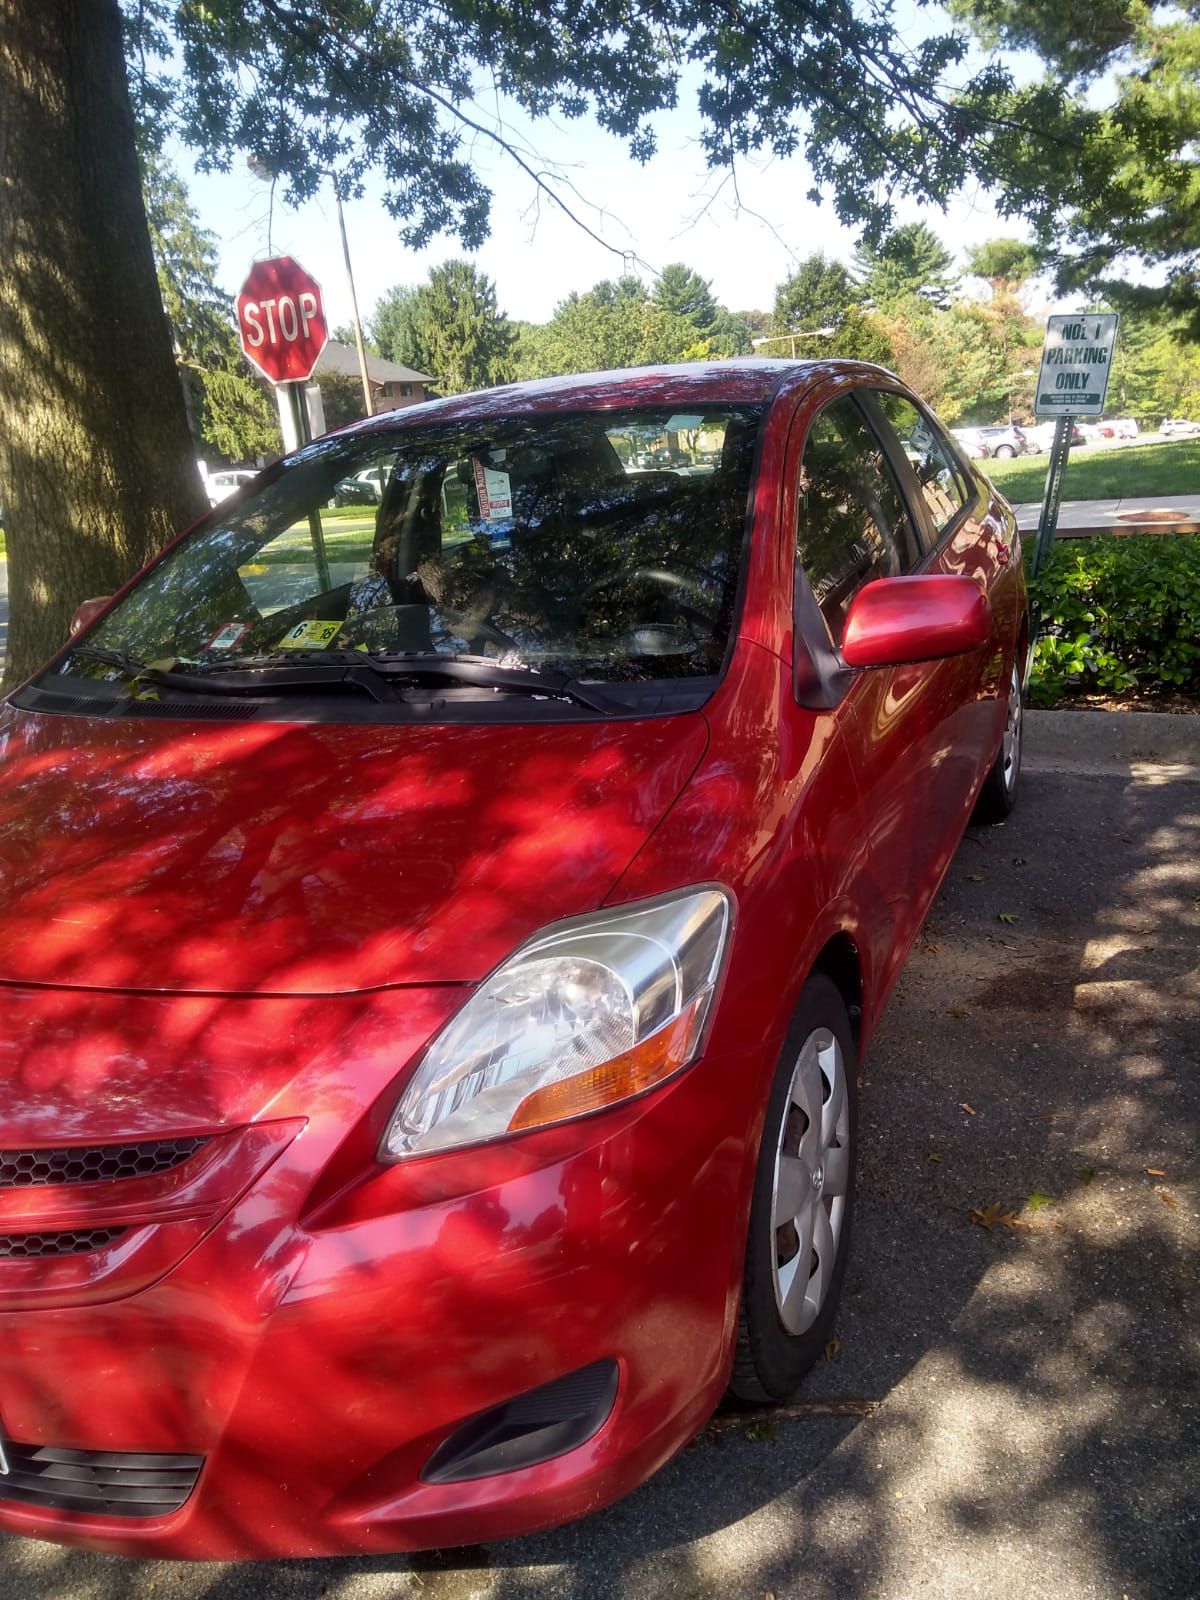 Toyota Yaris 2008 red colour